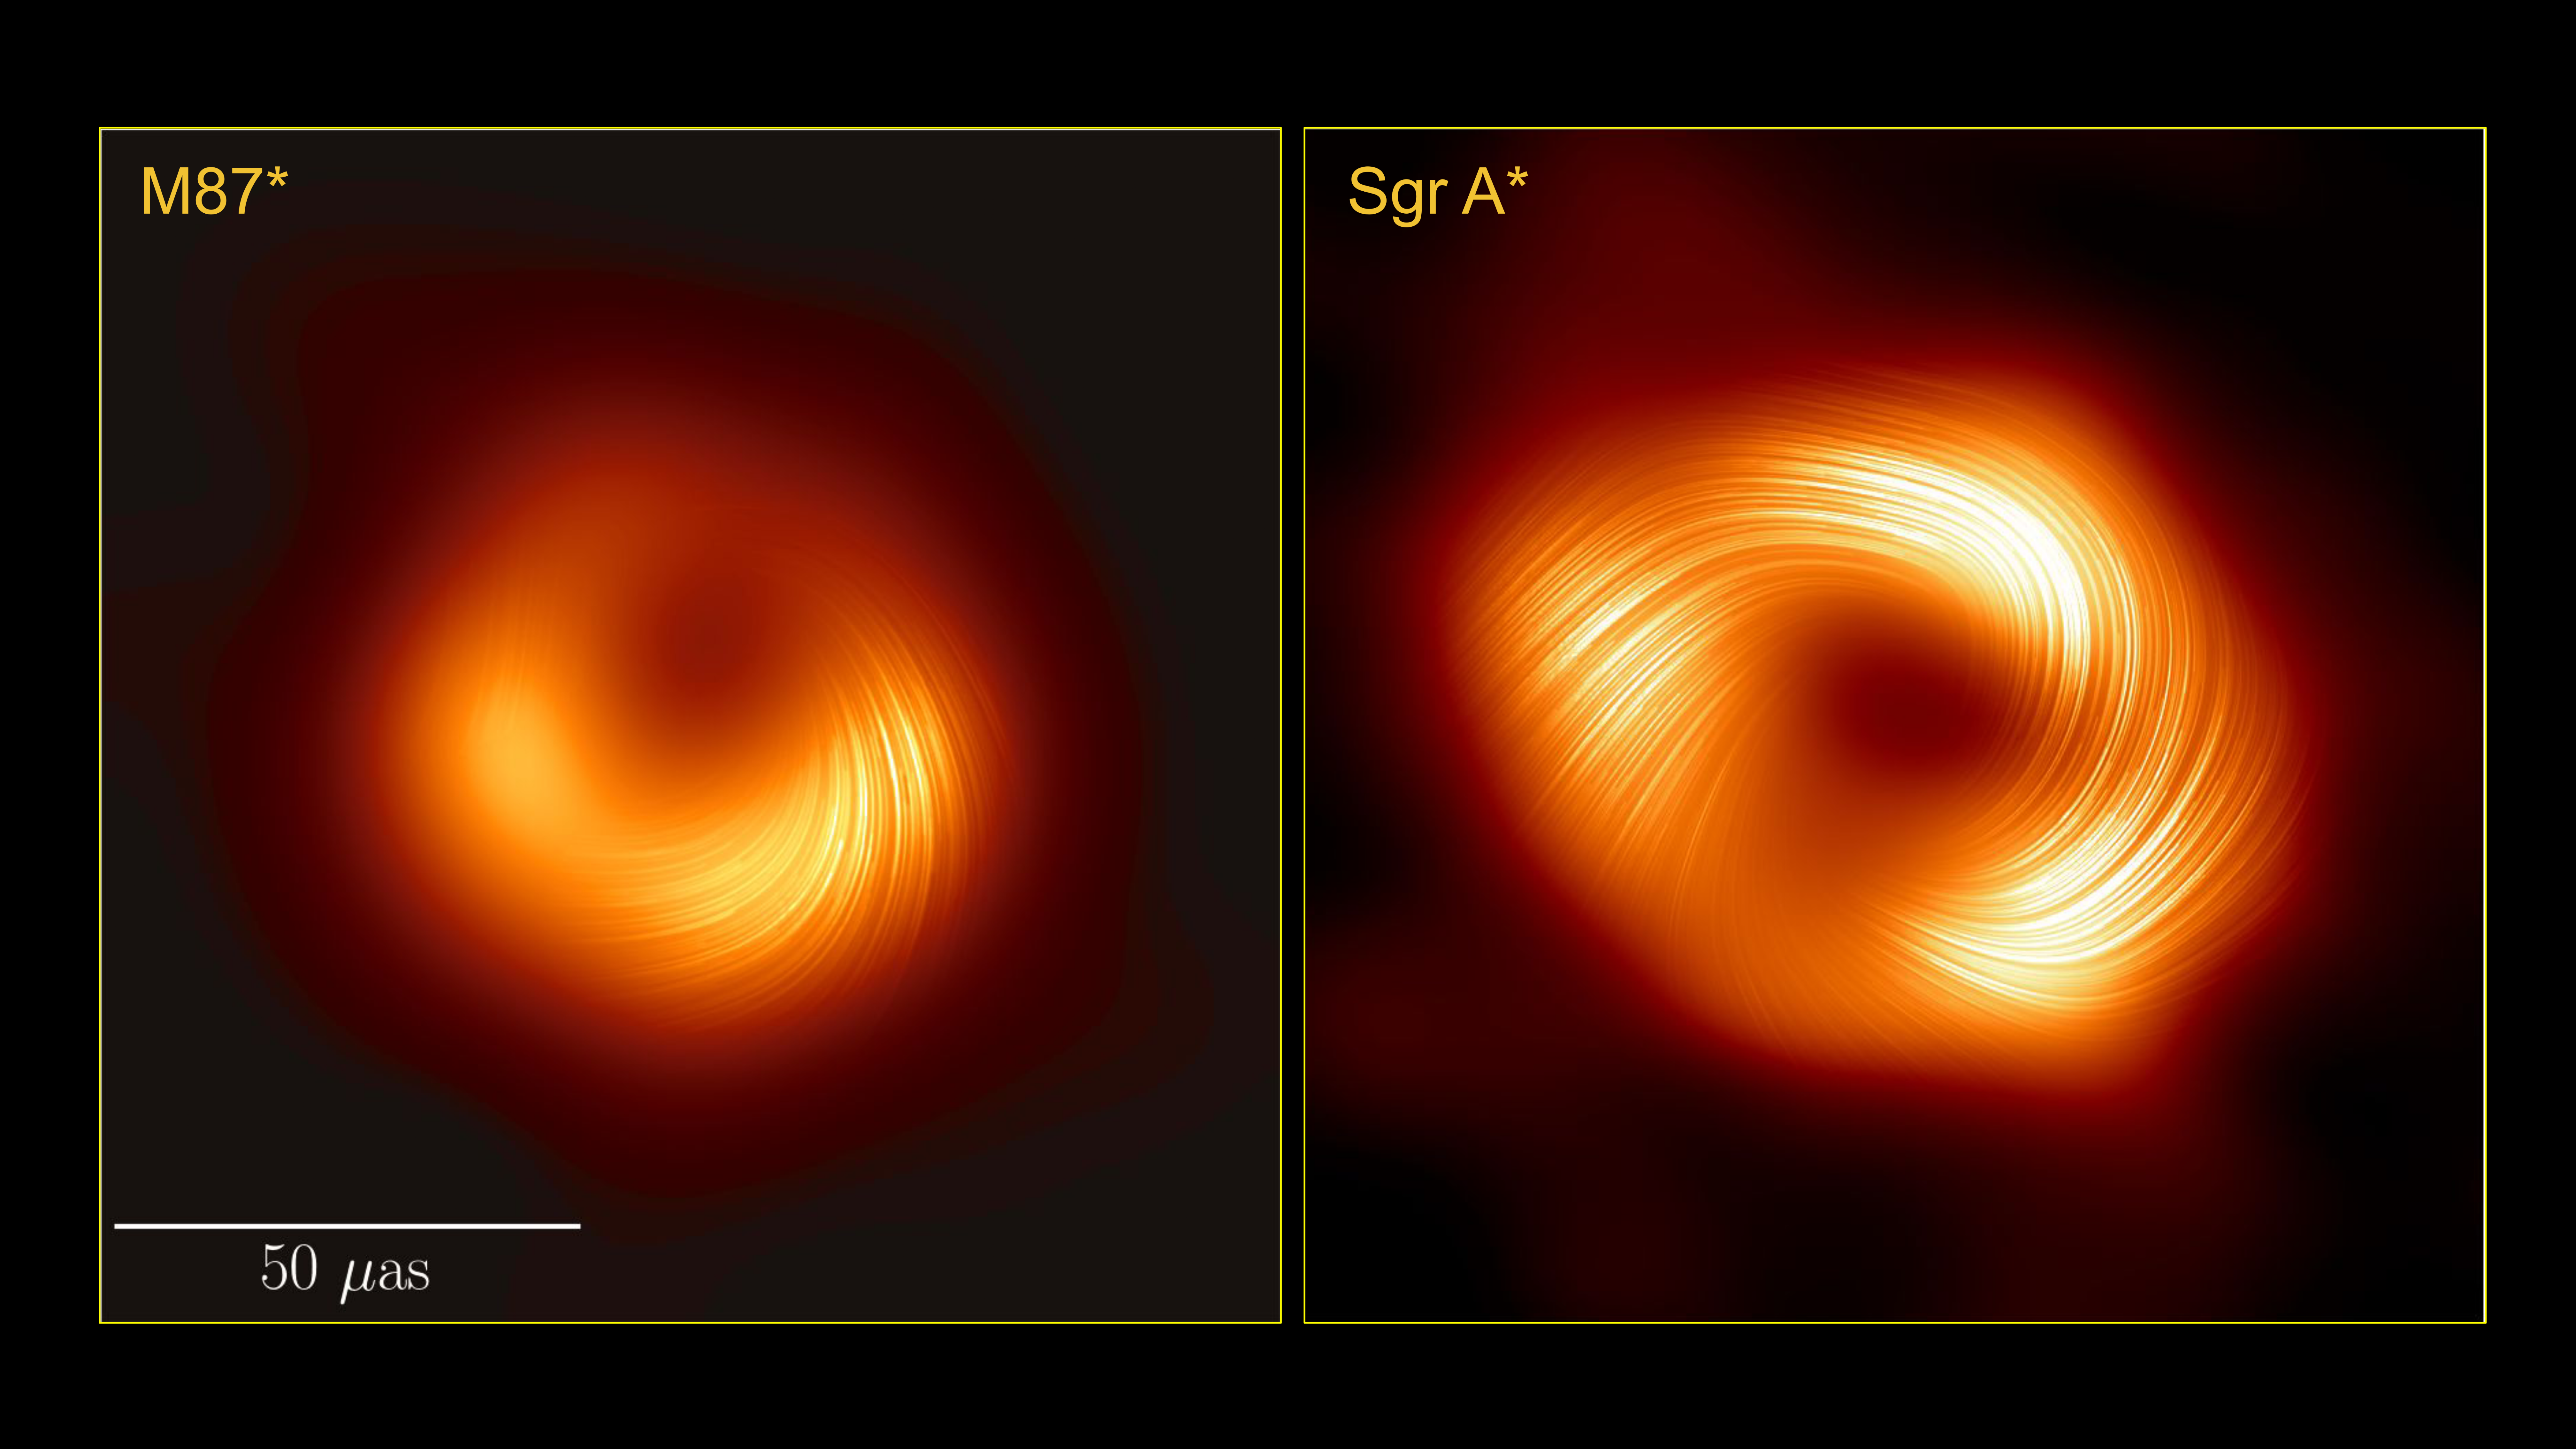 A side by side comparison of the two images of the black holes showing similar magnetic field represendte as bright thin lines over their roughly doughnut shape. The lines wrap around the whole shape